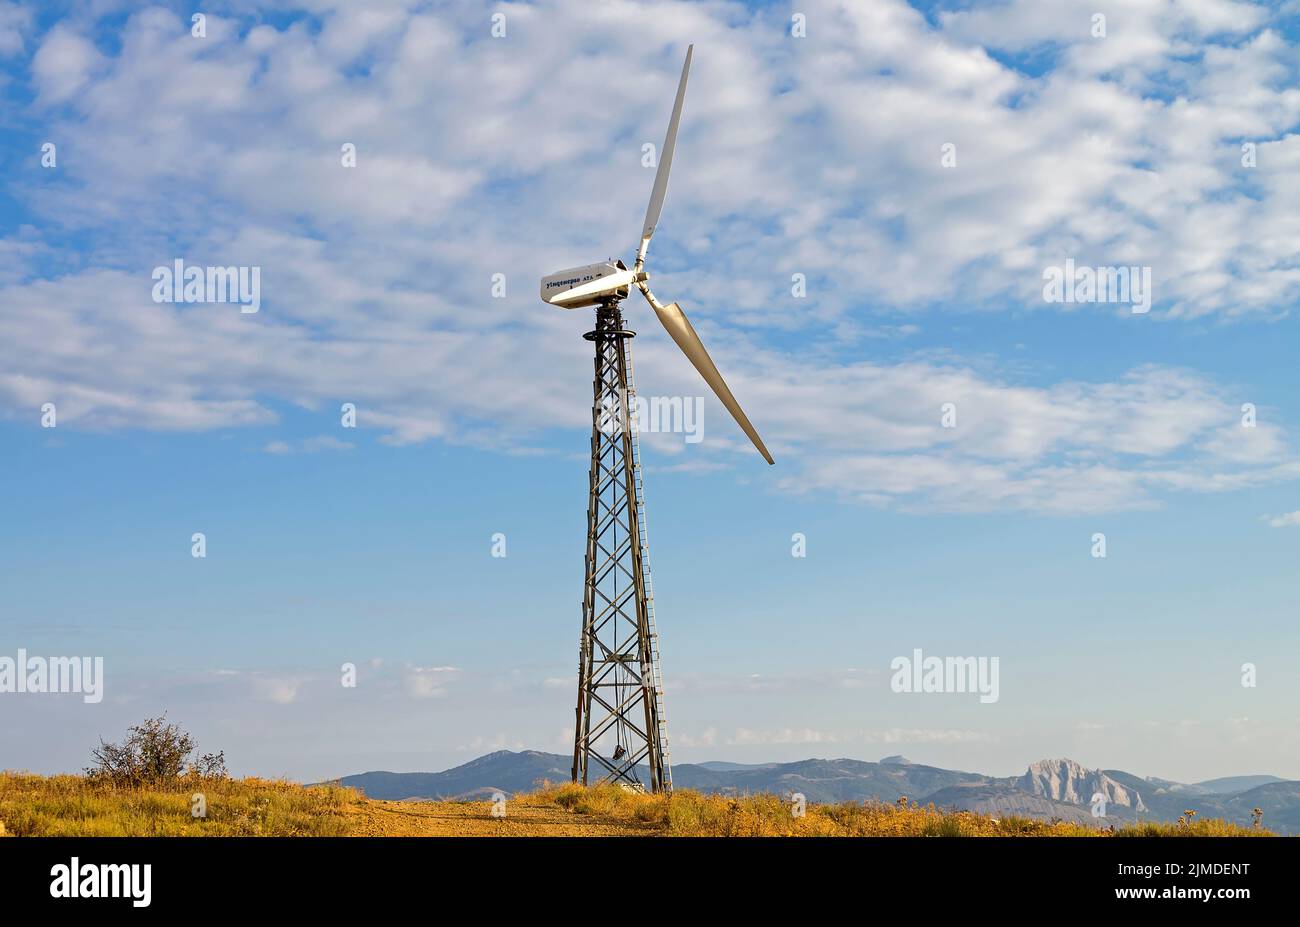 Mast with wind power generator on the background of sky. Stock Photo